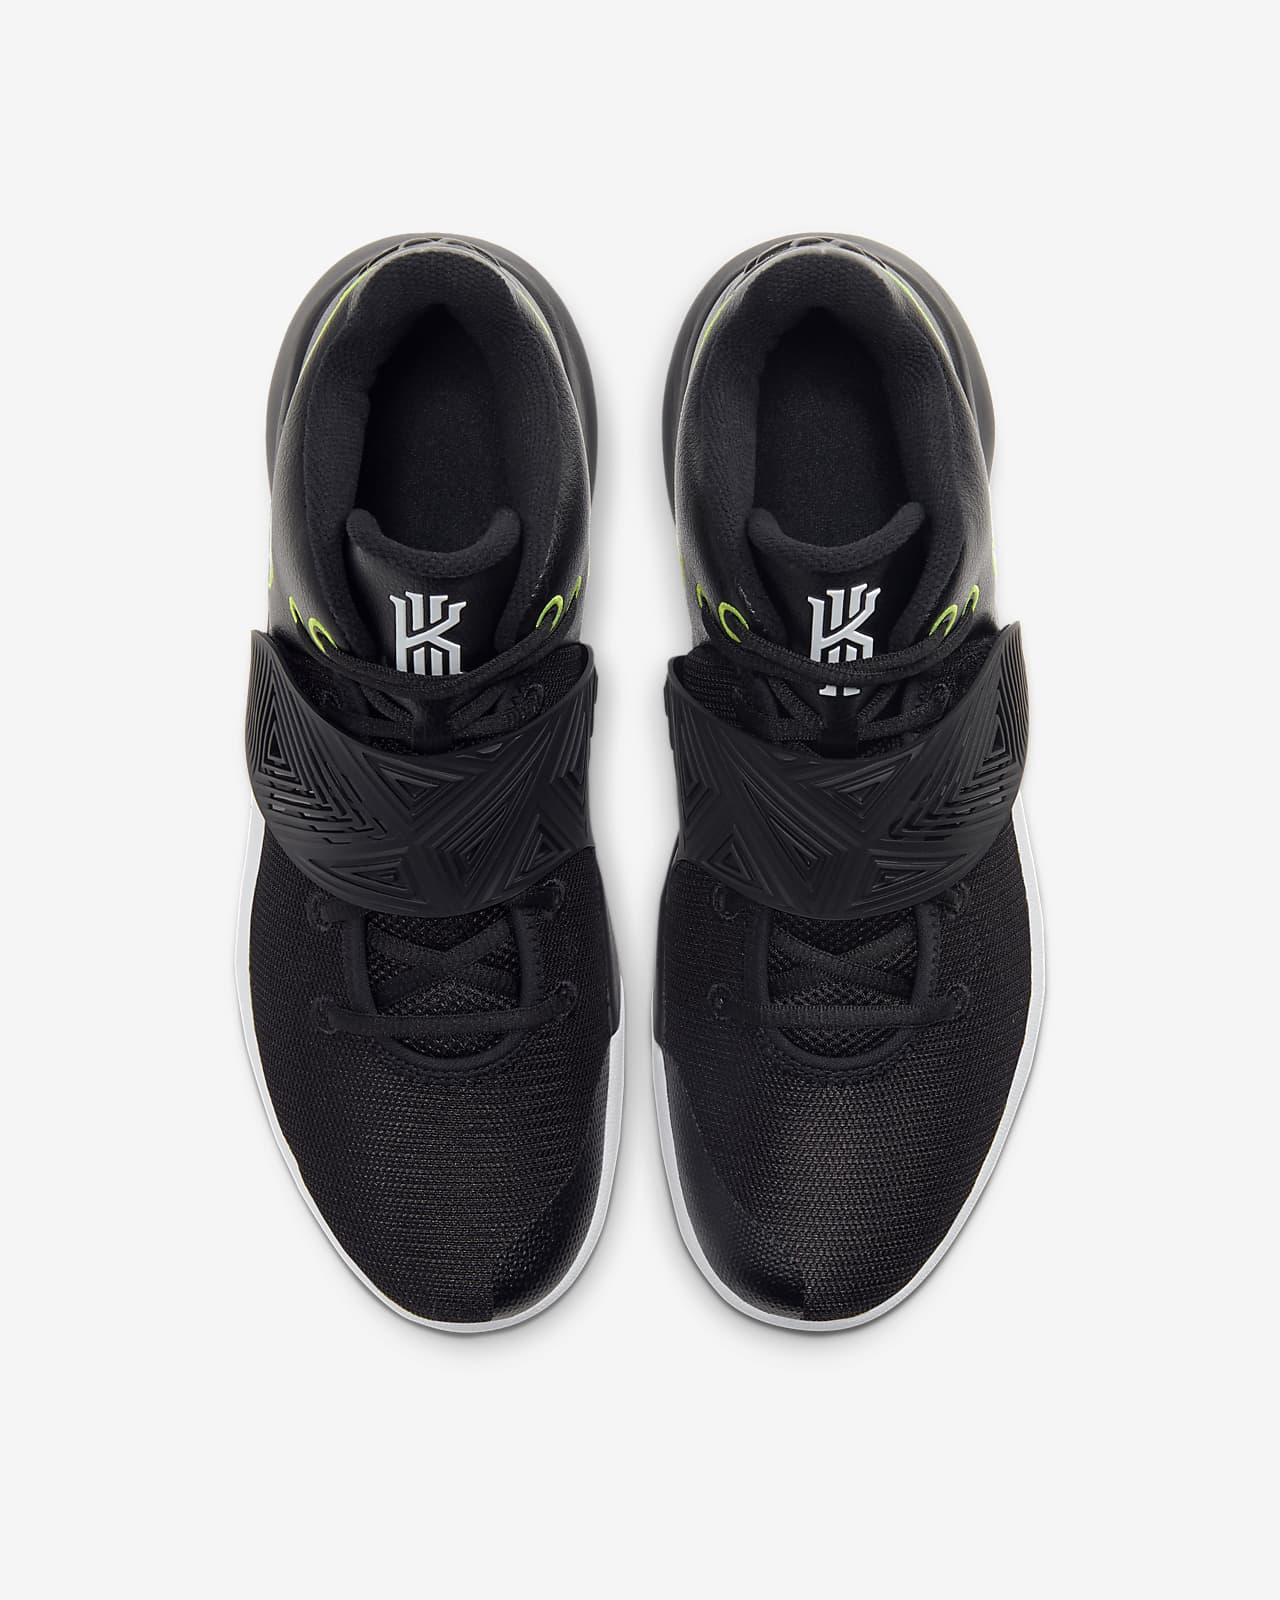 nike men's kyrie flytrap iii basketball shoes stores